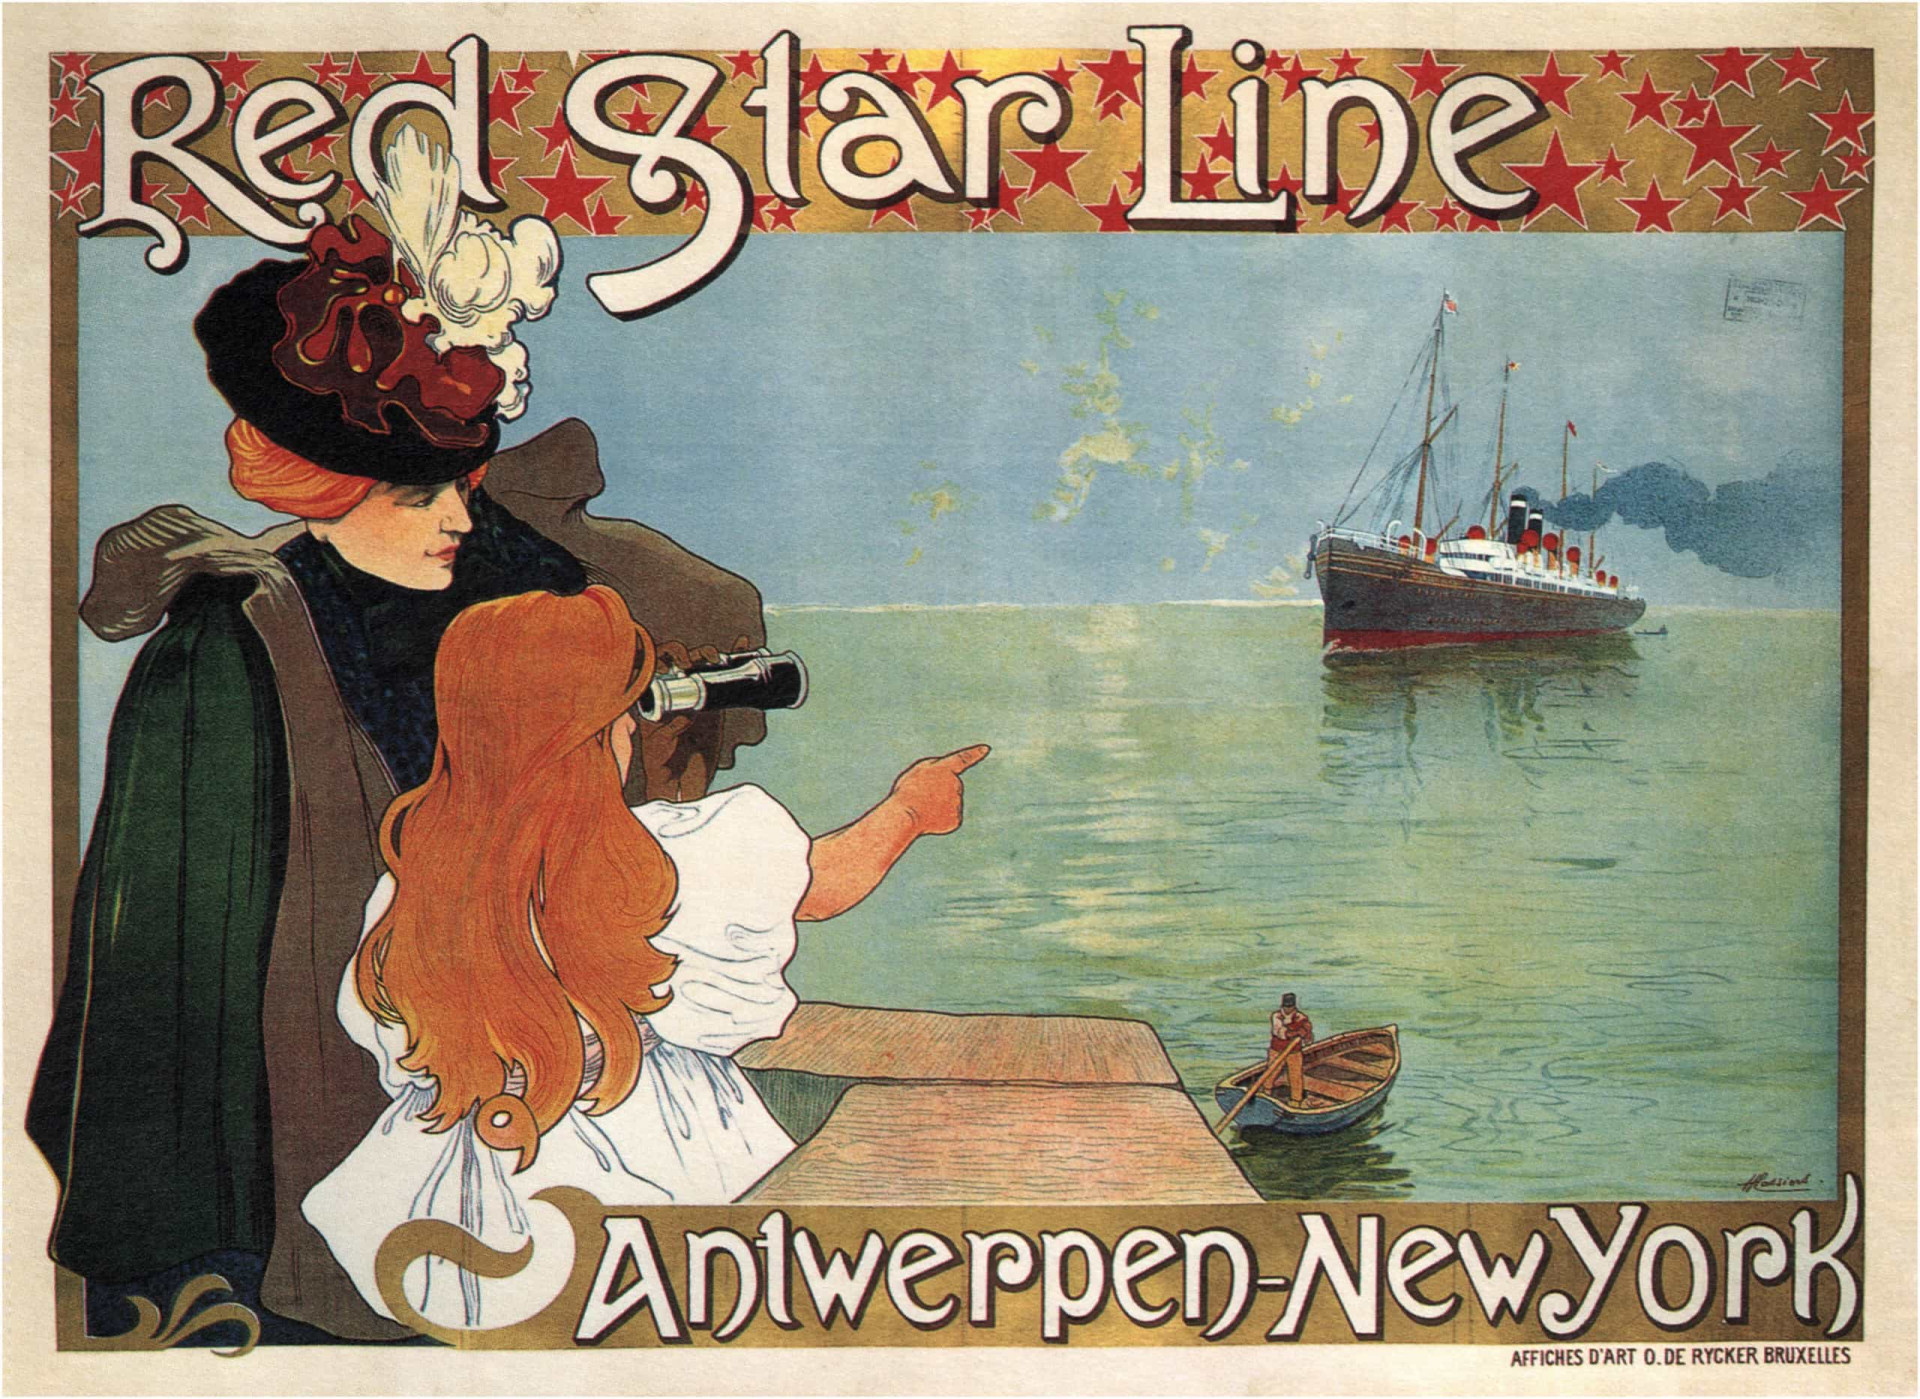 <p>The loss of the <em>Titanic</em> did little to dent the public's faith in the burgeoning cruise ship industry. Besides faster transatlantic crossings, passenger liner companies were expanding port of call choice. The Norwegian-American-owned Red Star Line, for example, listed its main ports of call as Antwerp in Belgium, Liverpool and Southampton in the United Kingdom, and New York City and Philadelphia in the United States.</p>